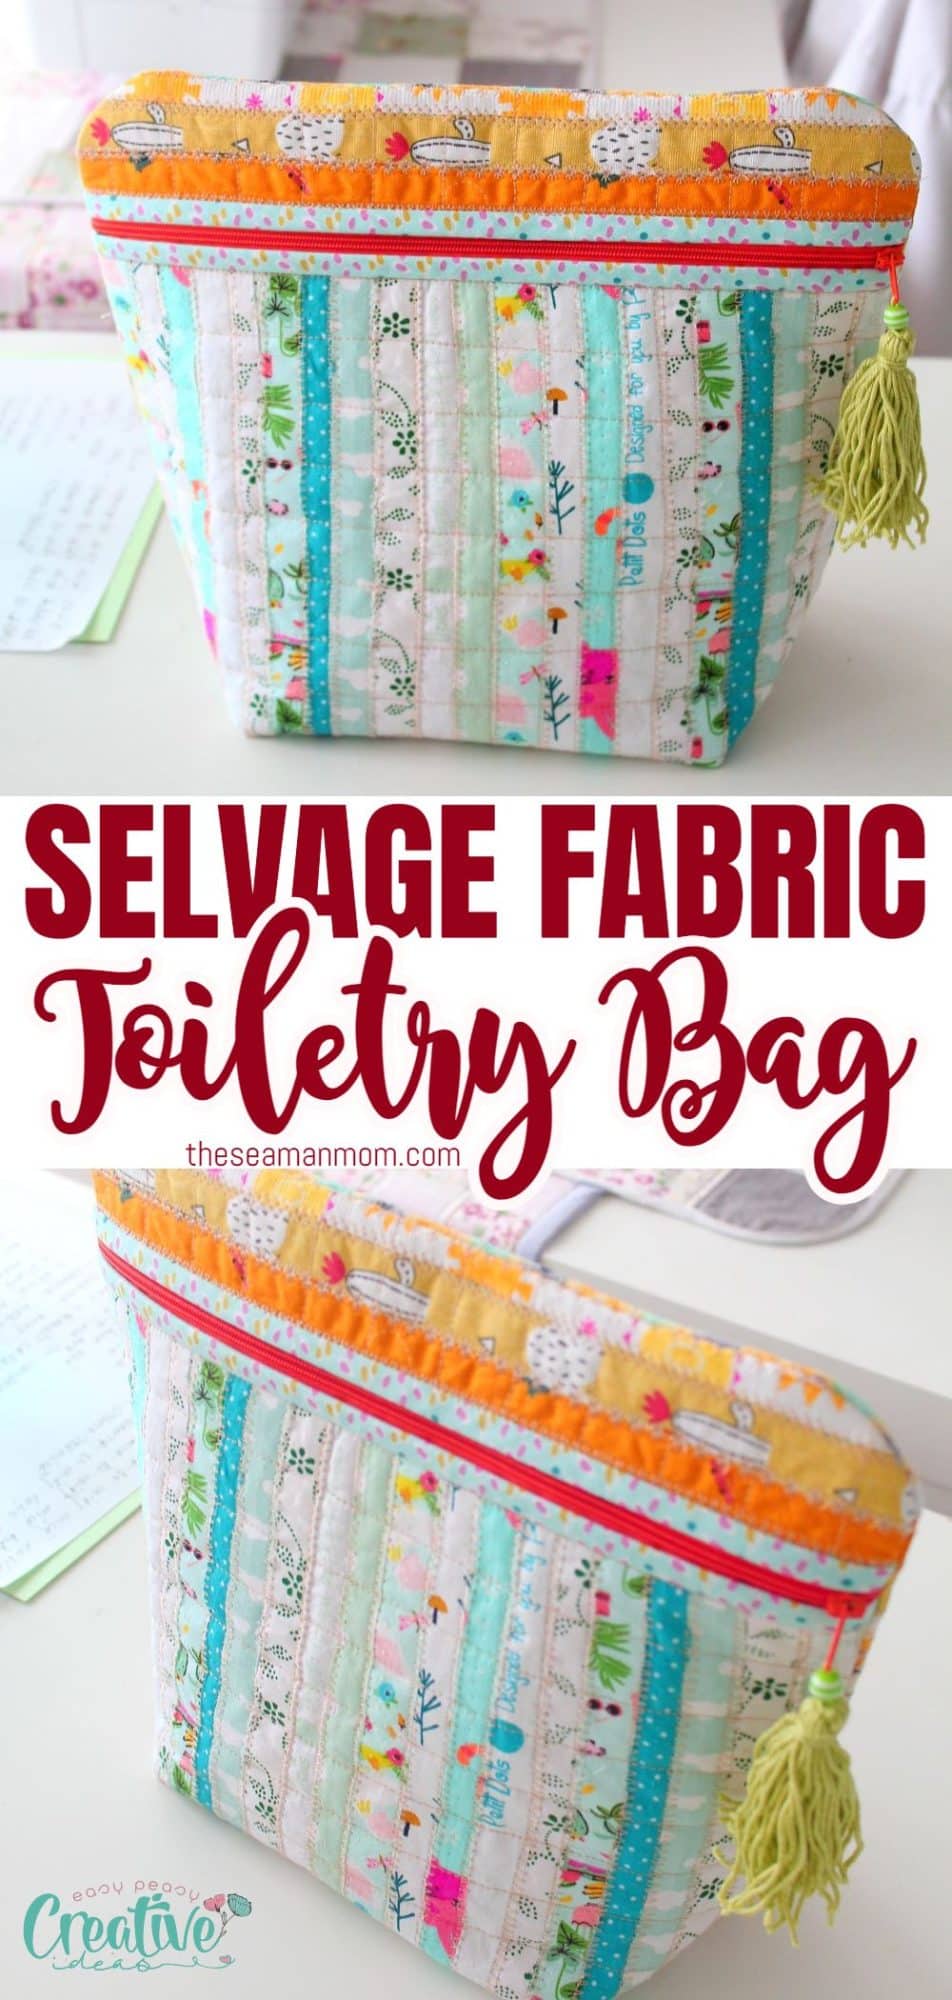 Quilted toiletry bag with selvage